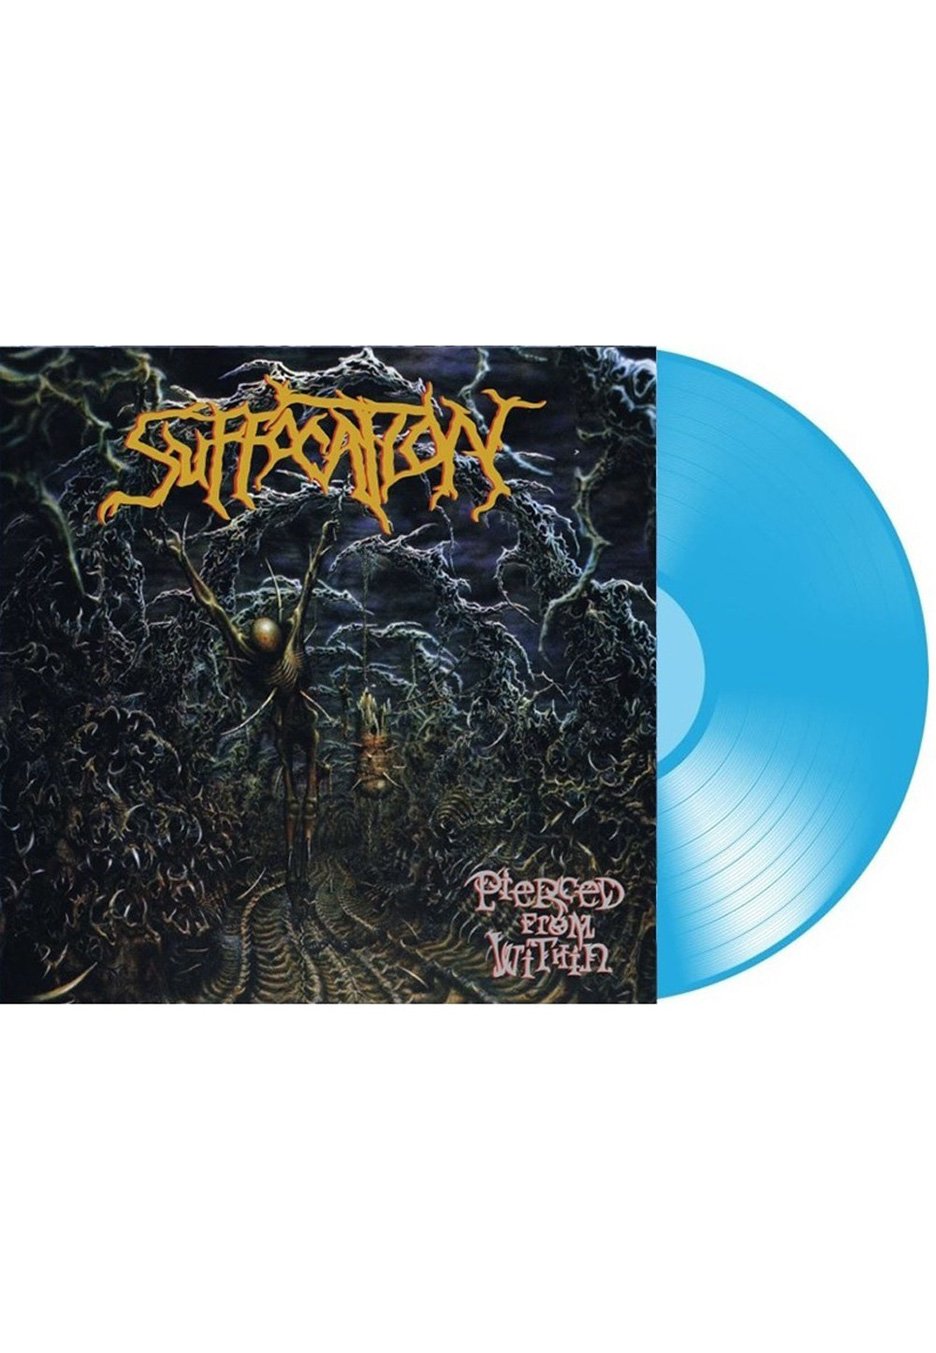 Suffocation - Pierced From Within Transparent Blue - Colored Vinyl